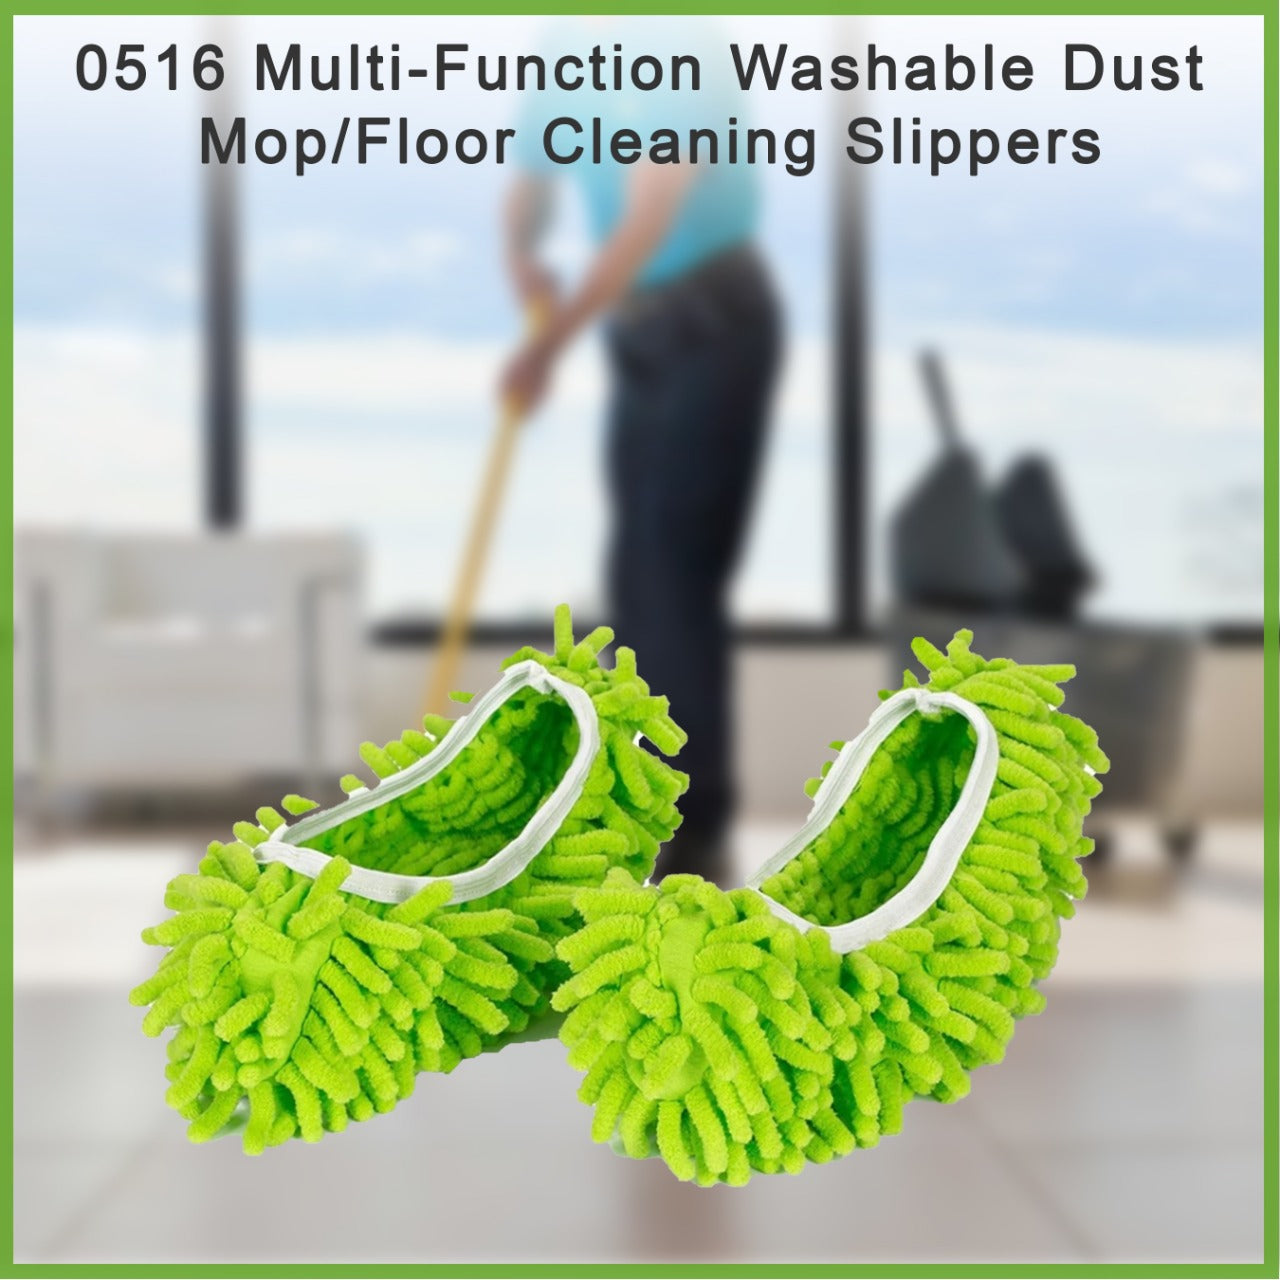 0516 Multi-Function Washable Dust Mop/Floor Cleaning Slippers Dukandaily